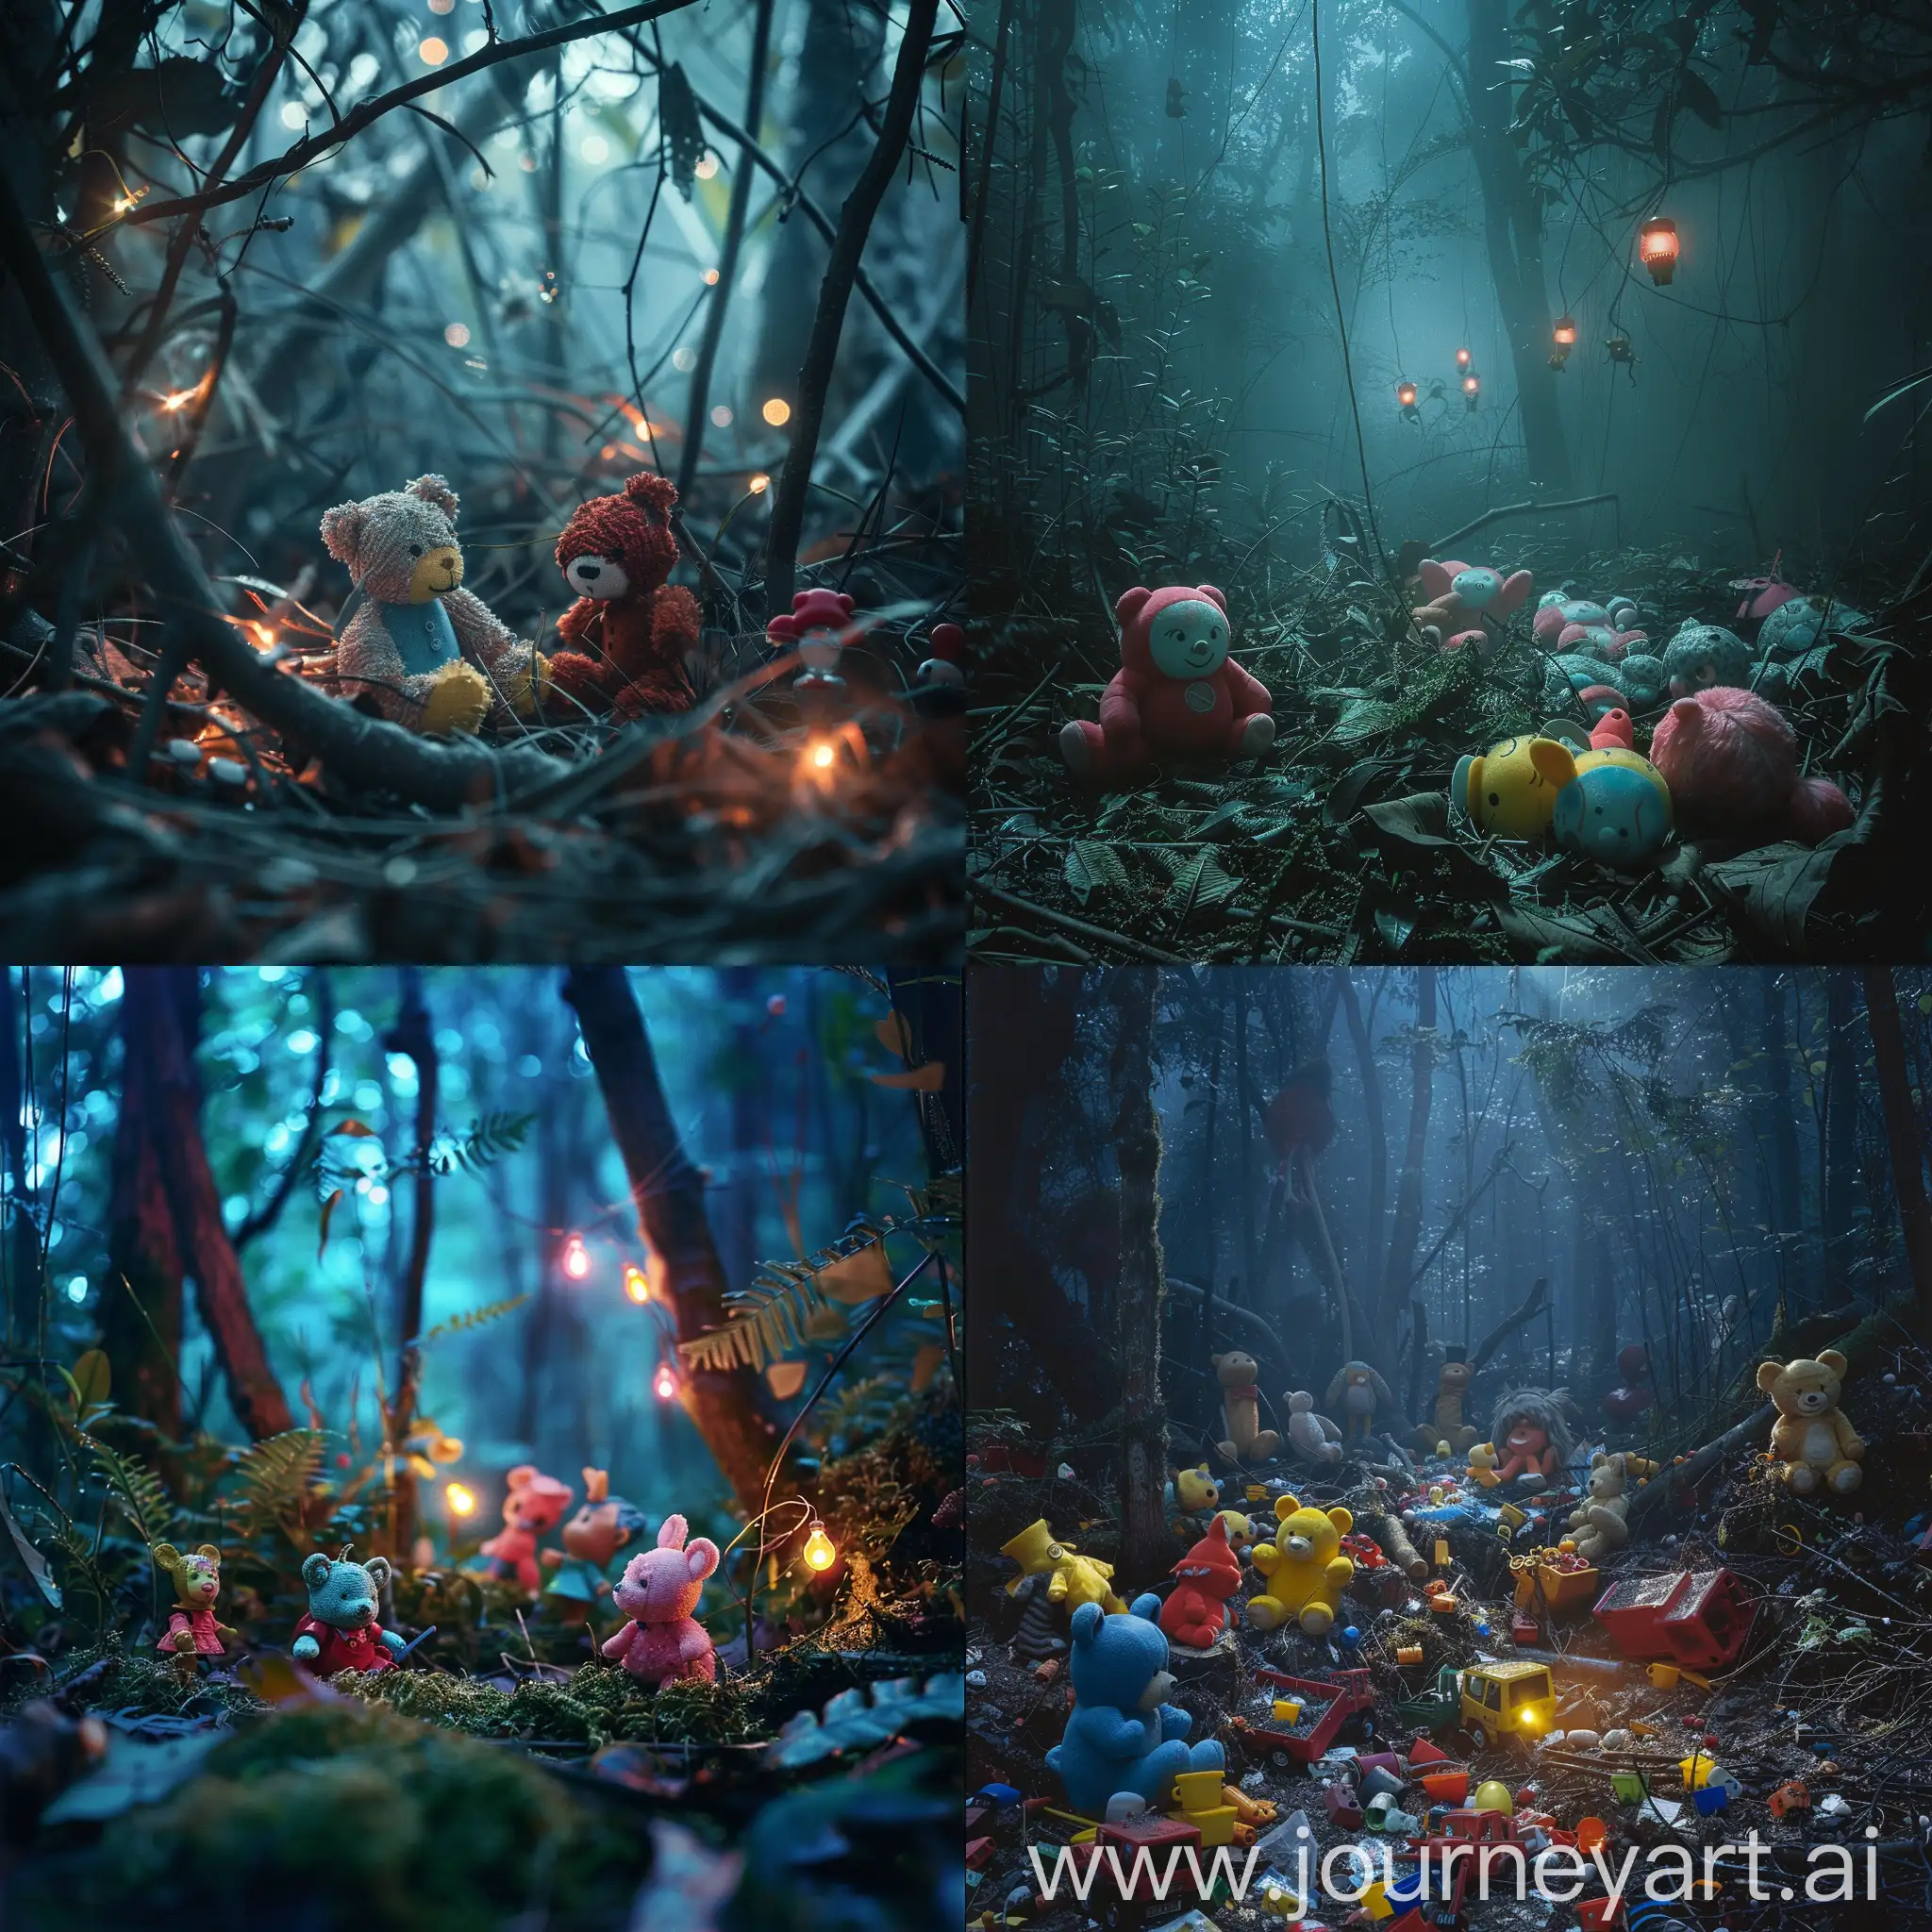 vivid toys are abandoned in a thick forest, surreal lights